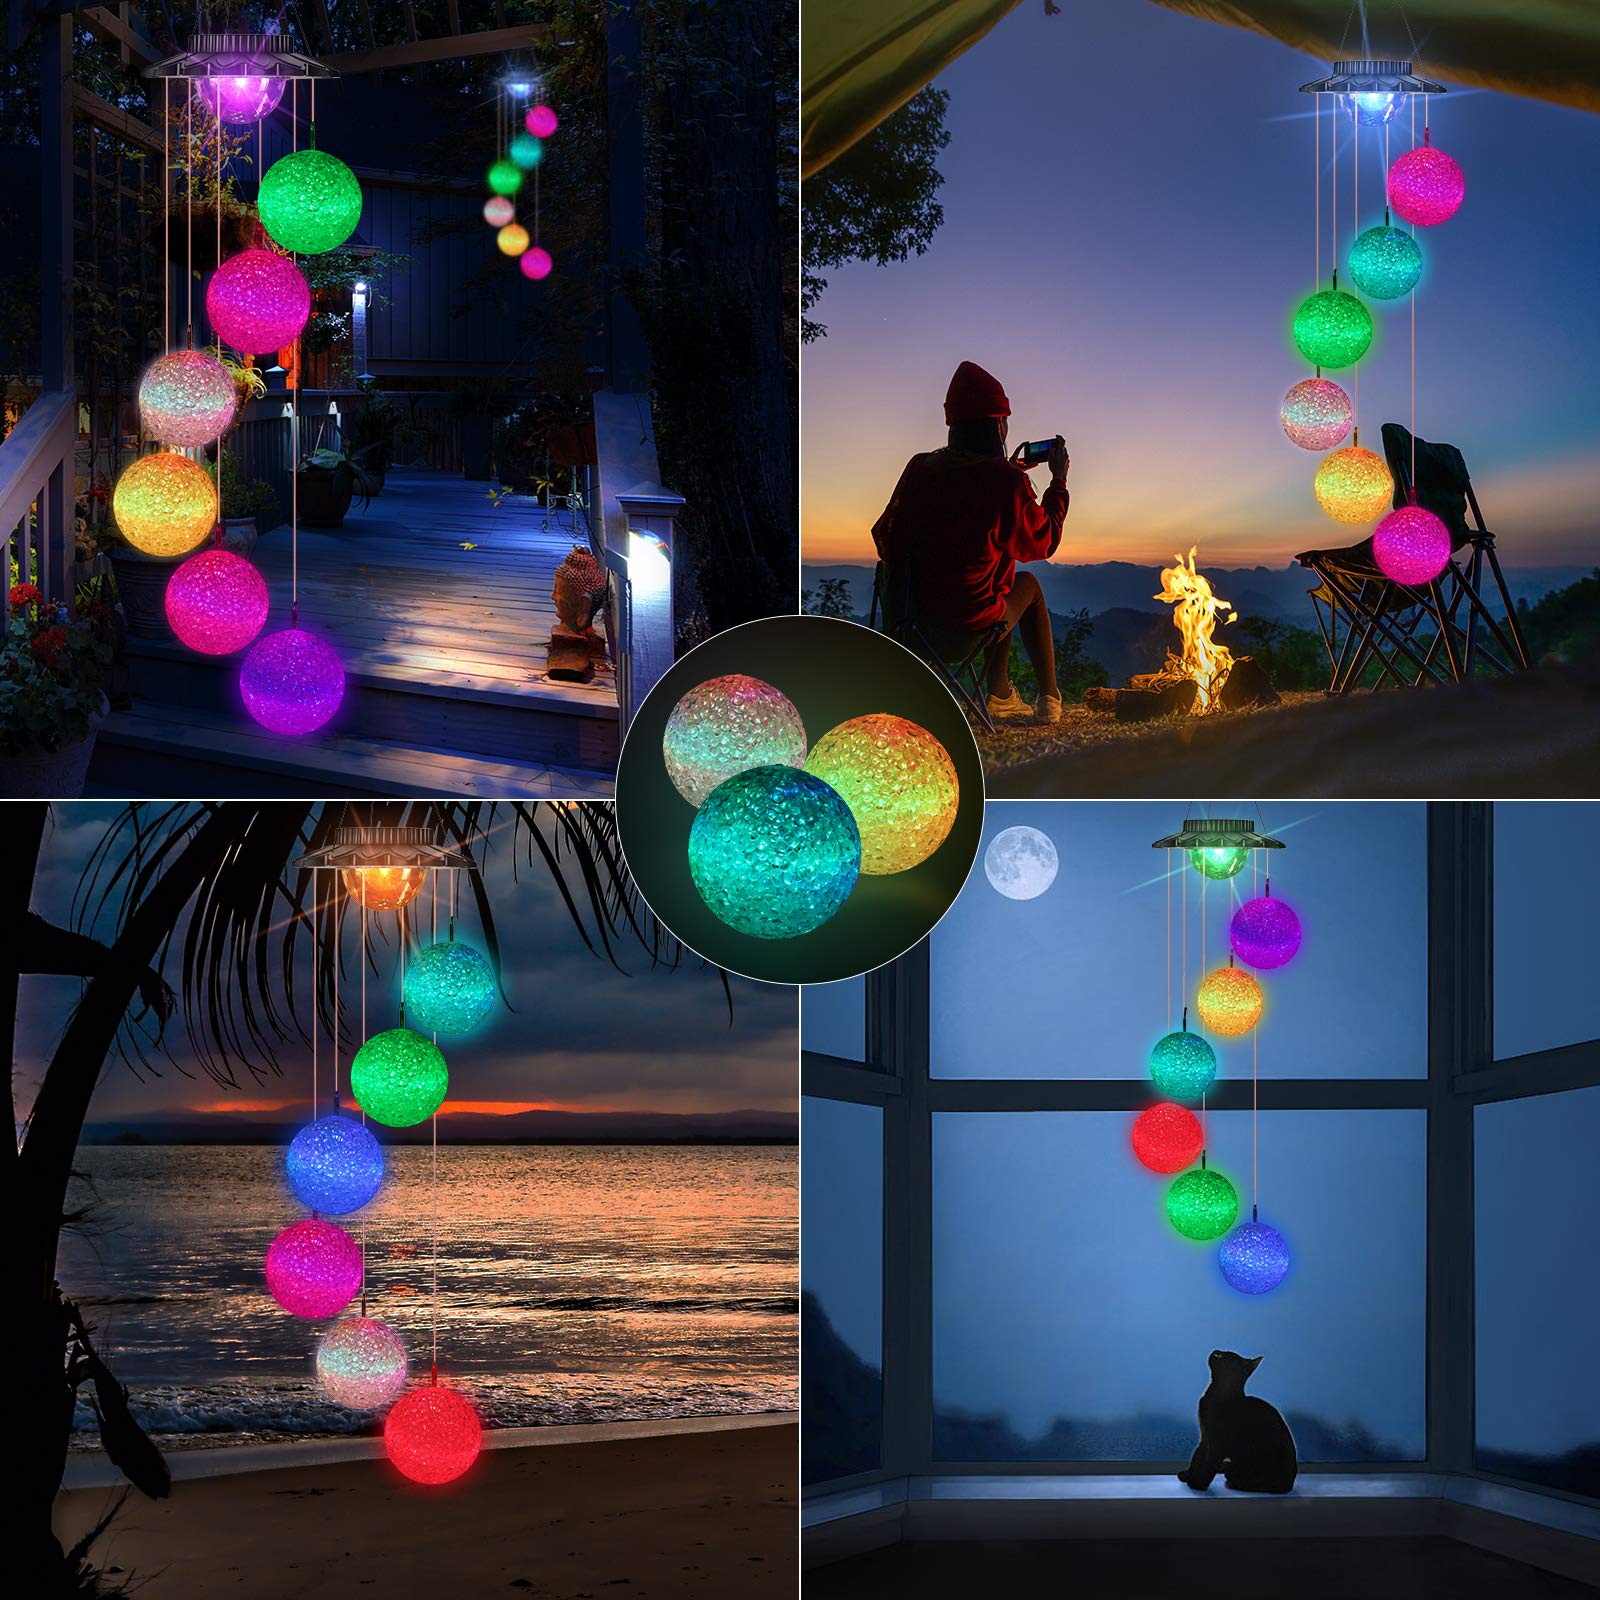 iShabao Solar Wind Chimes, LED Ball Color Changing Outdoor Indoor Waterproof Mobile Decorative Outdoor Hanging Solar Lights for Home Patio Yard Garden Decor Birthday Great Gifts